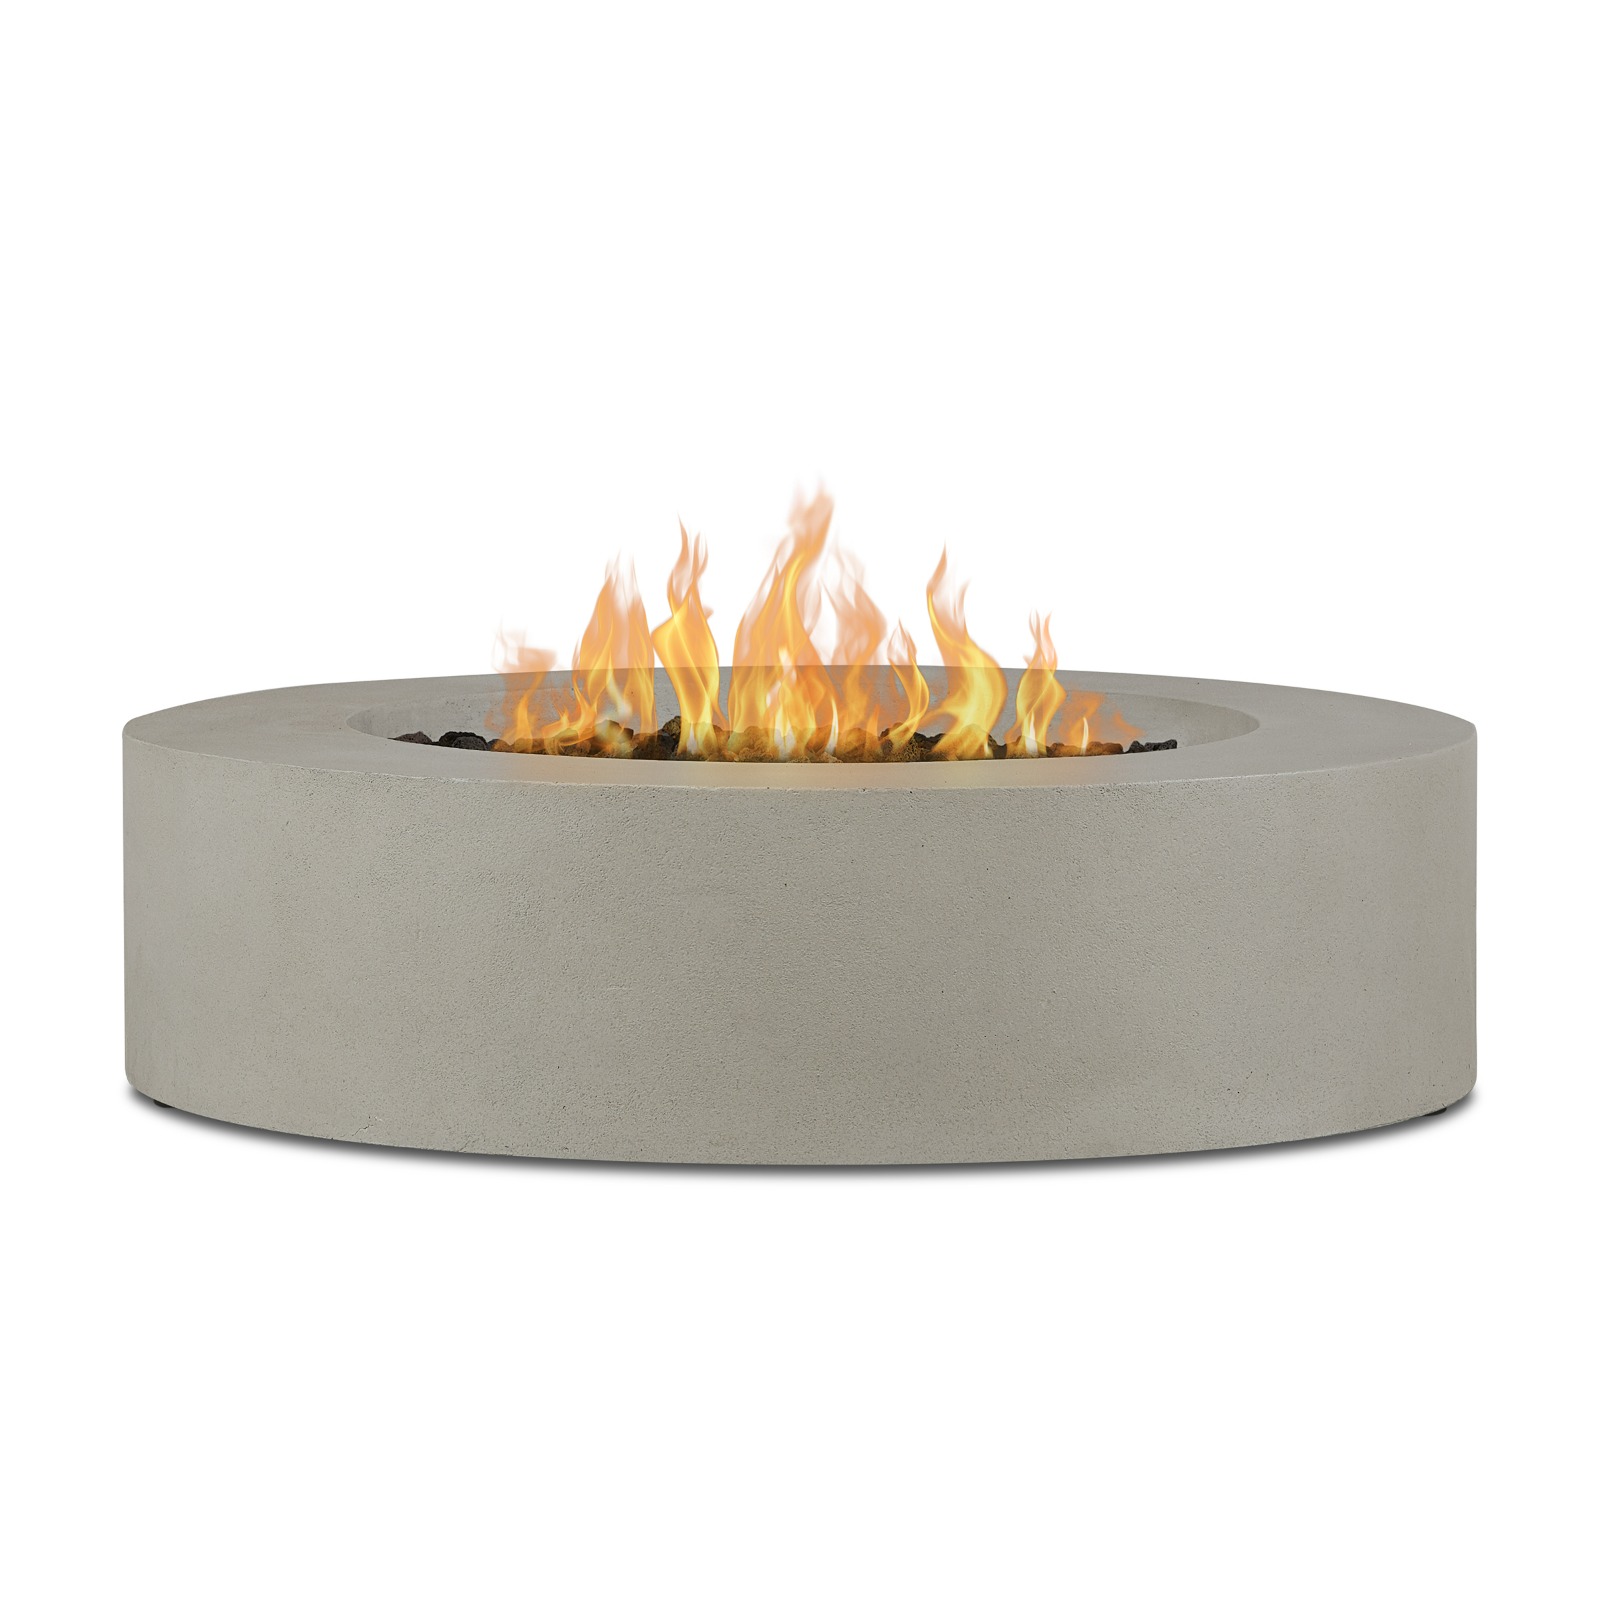 43"La Valle  Round Propane Fire Table in Flint on white background